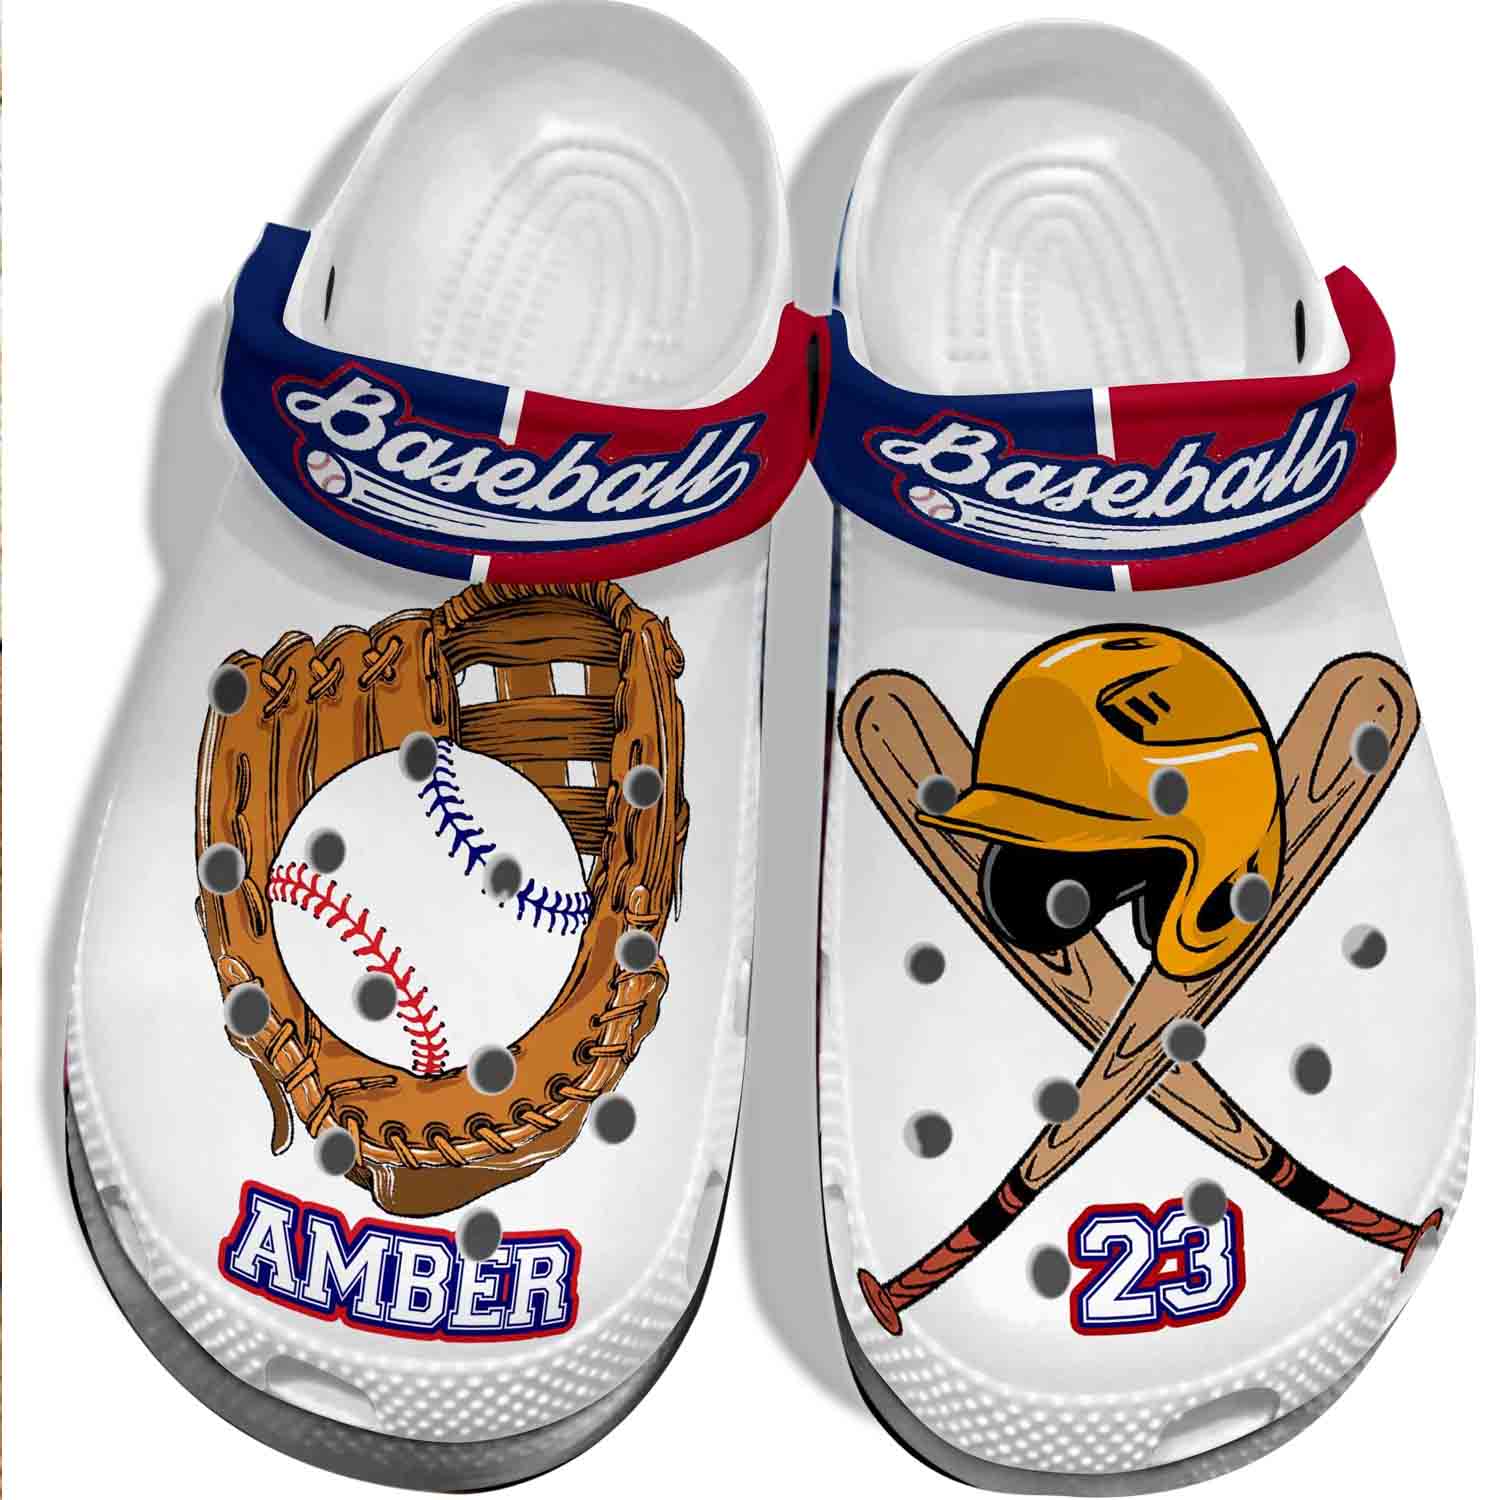 Player Baseball Equipment Crocs Clog Can Customize Name Number Birthday Gifts For Son Daughter